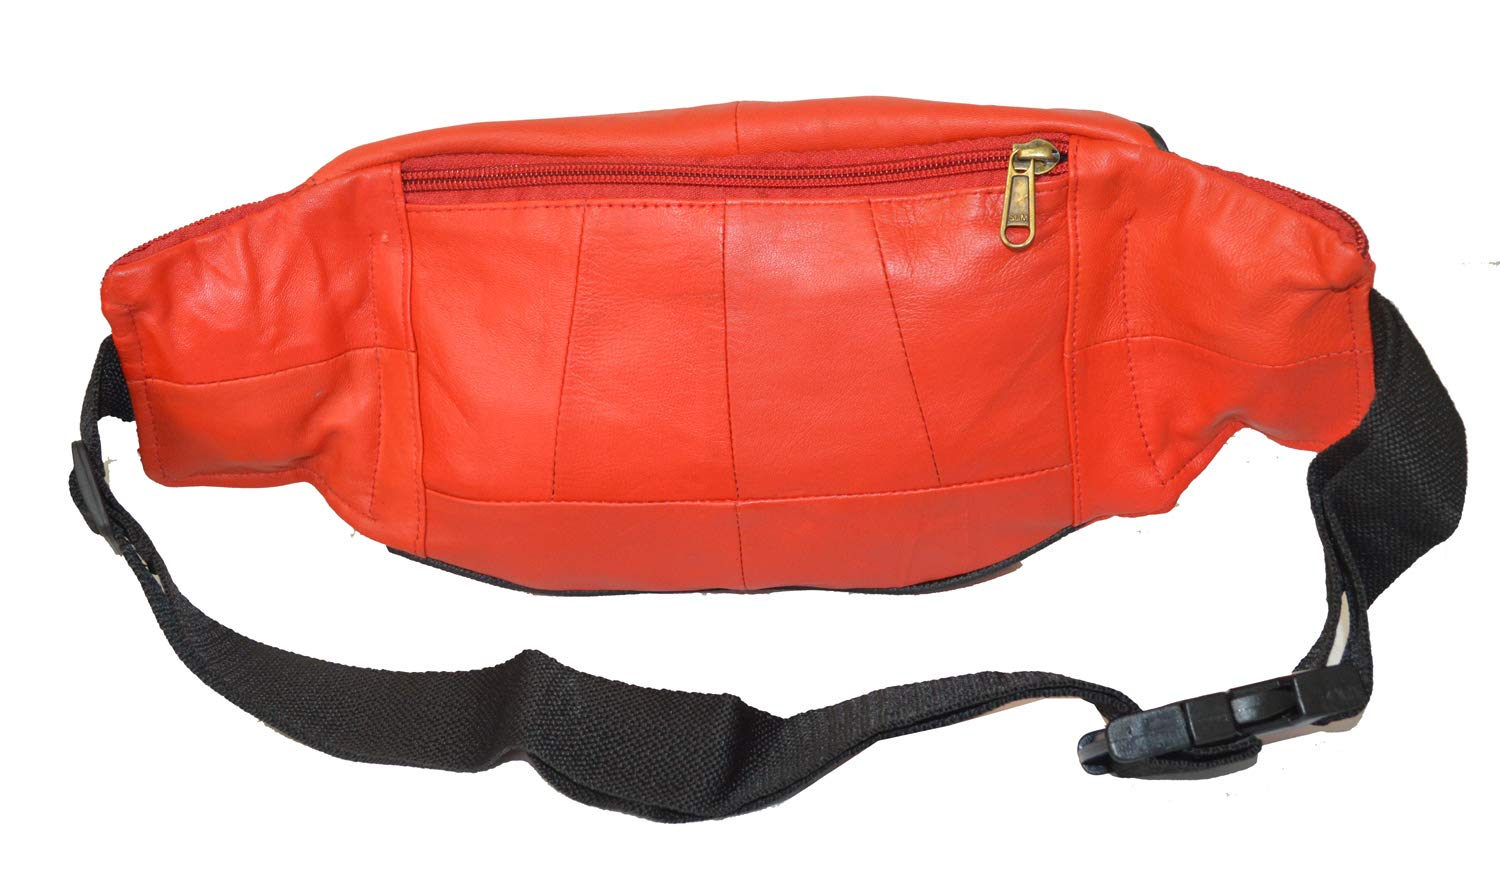 Leatherboss Genuine Leather Fanny Pack Pouch Waist Belt Bag for travel for men women, Red